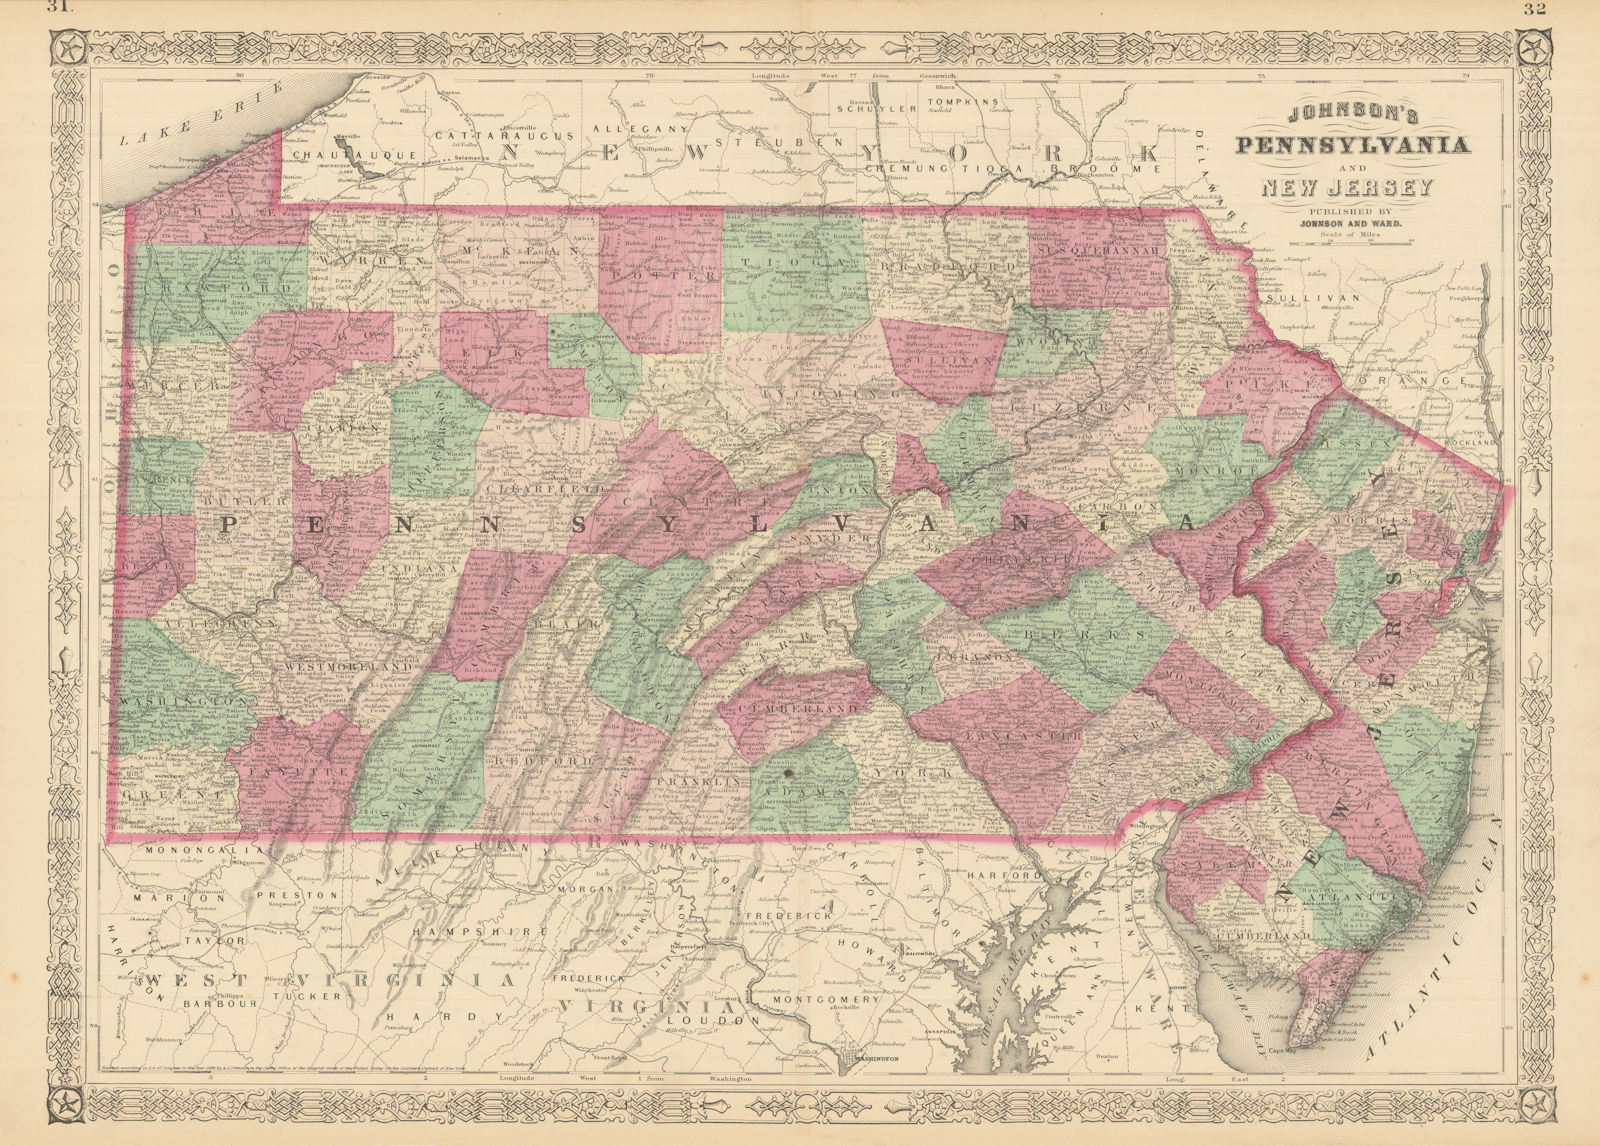 Associate Product Johnson's Pennsylvania and New Jersey. US state map showing counties 1866